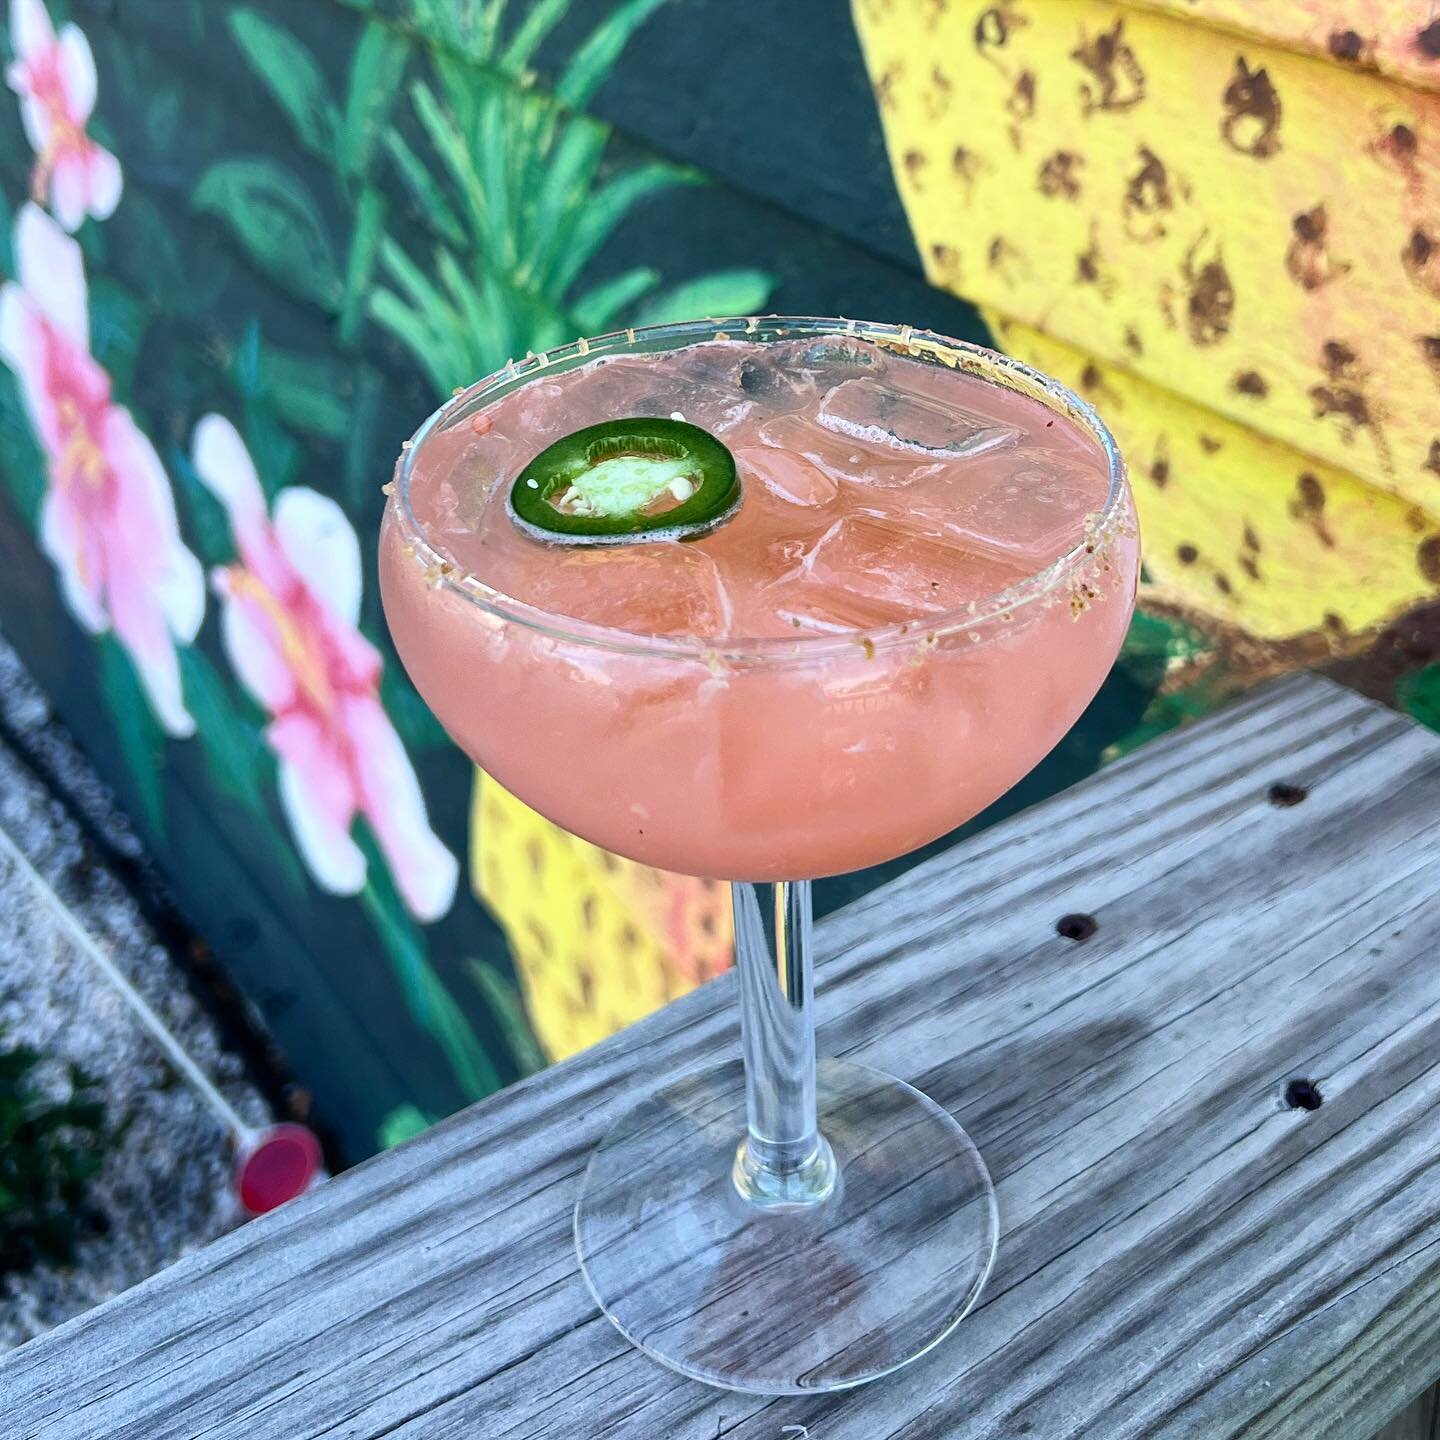 We&rsquo;re sippin on Azalea Rita&rsquo;s! 🌺

Solento Organic Tequila, Fresh Squeezed Lime Juice, House Made Strawberry-Cucumber-Jalape&ntilde;o Simple Syrup &amp; Wrightsville Beach Sriracha Sea Salt Rim